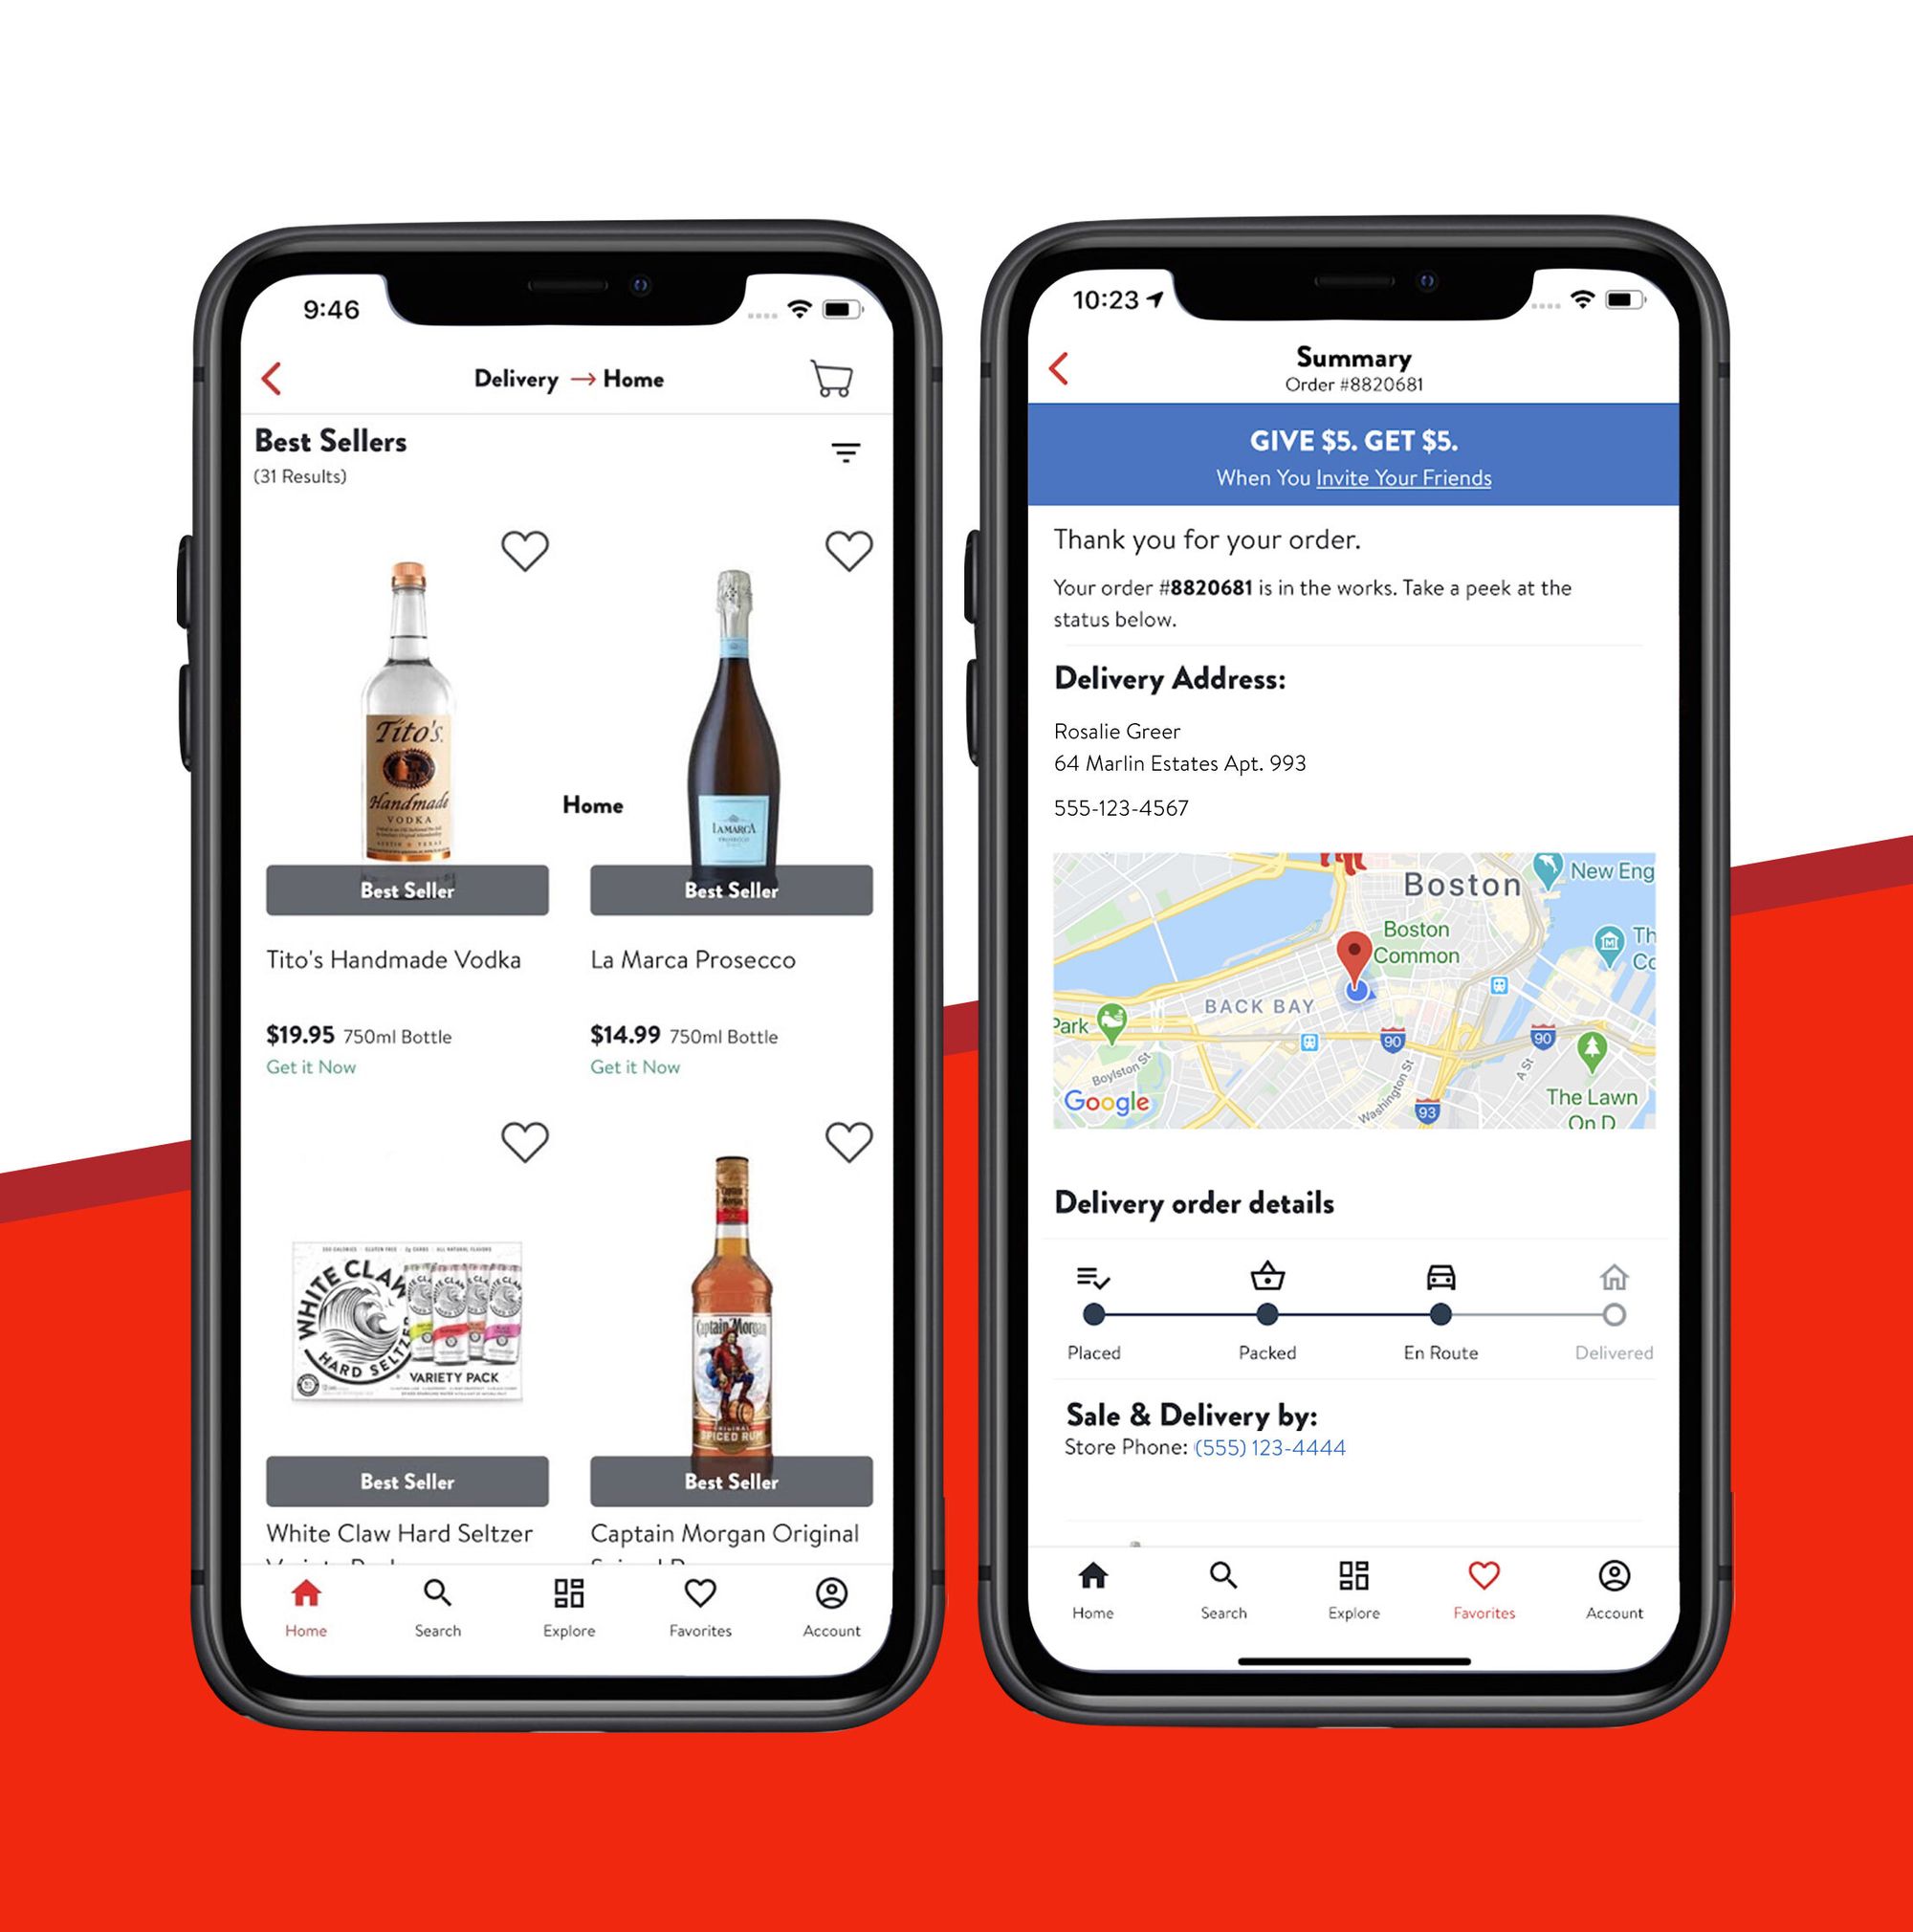 Drizly customers order online for beer, wine, and spirits deliveries